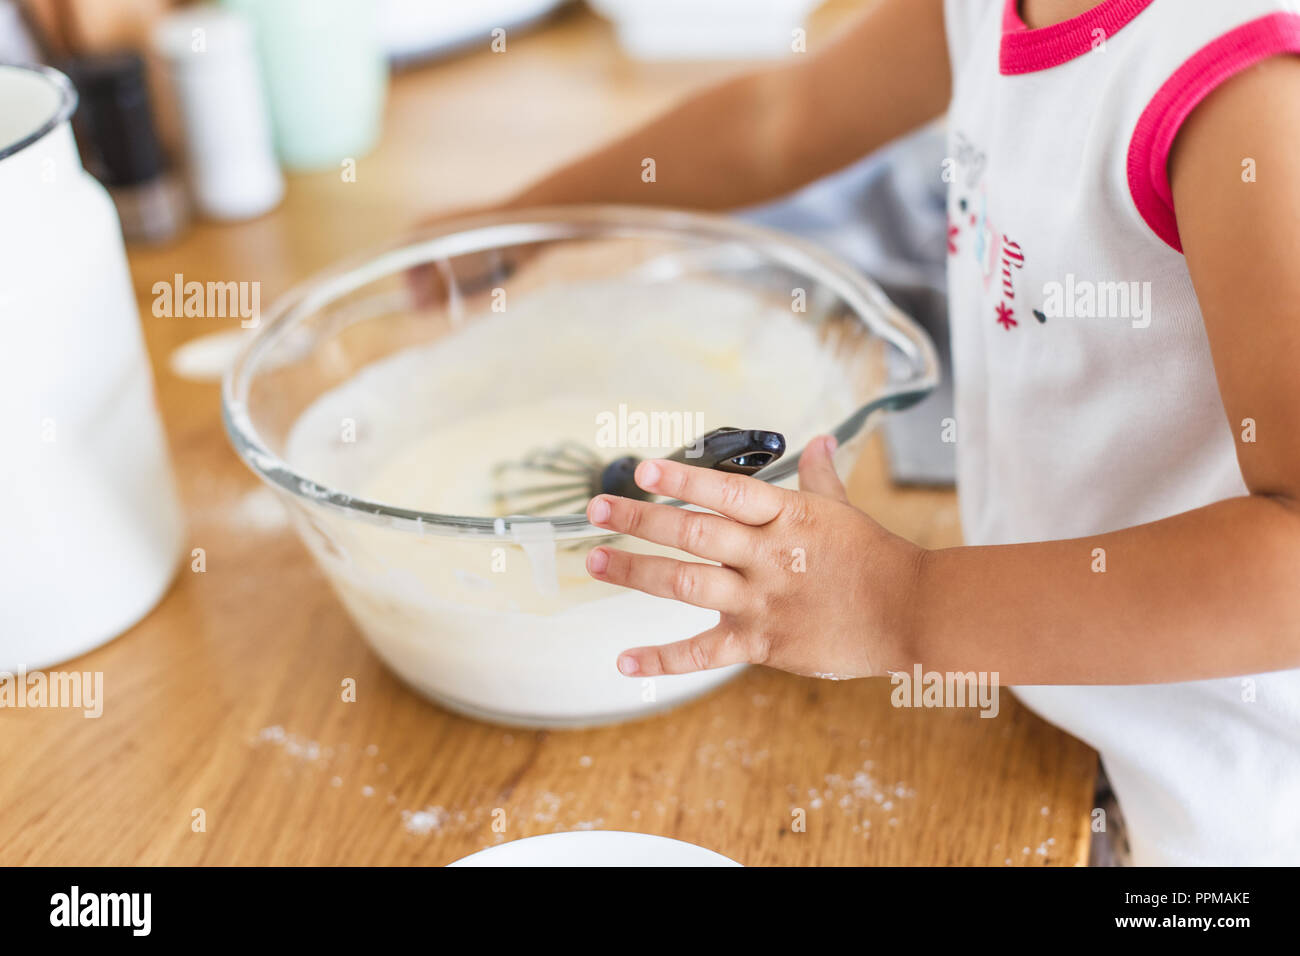 Little girl preparing dough for pancakes at the kitchen. Concept of food preparation, white kitchen on background. Casual lifestyle photo series in re Stock Photo